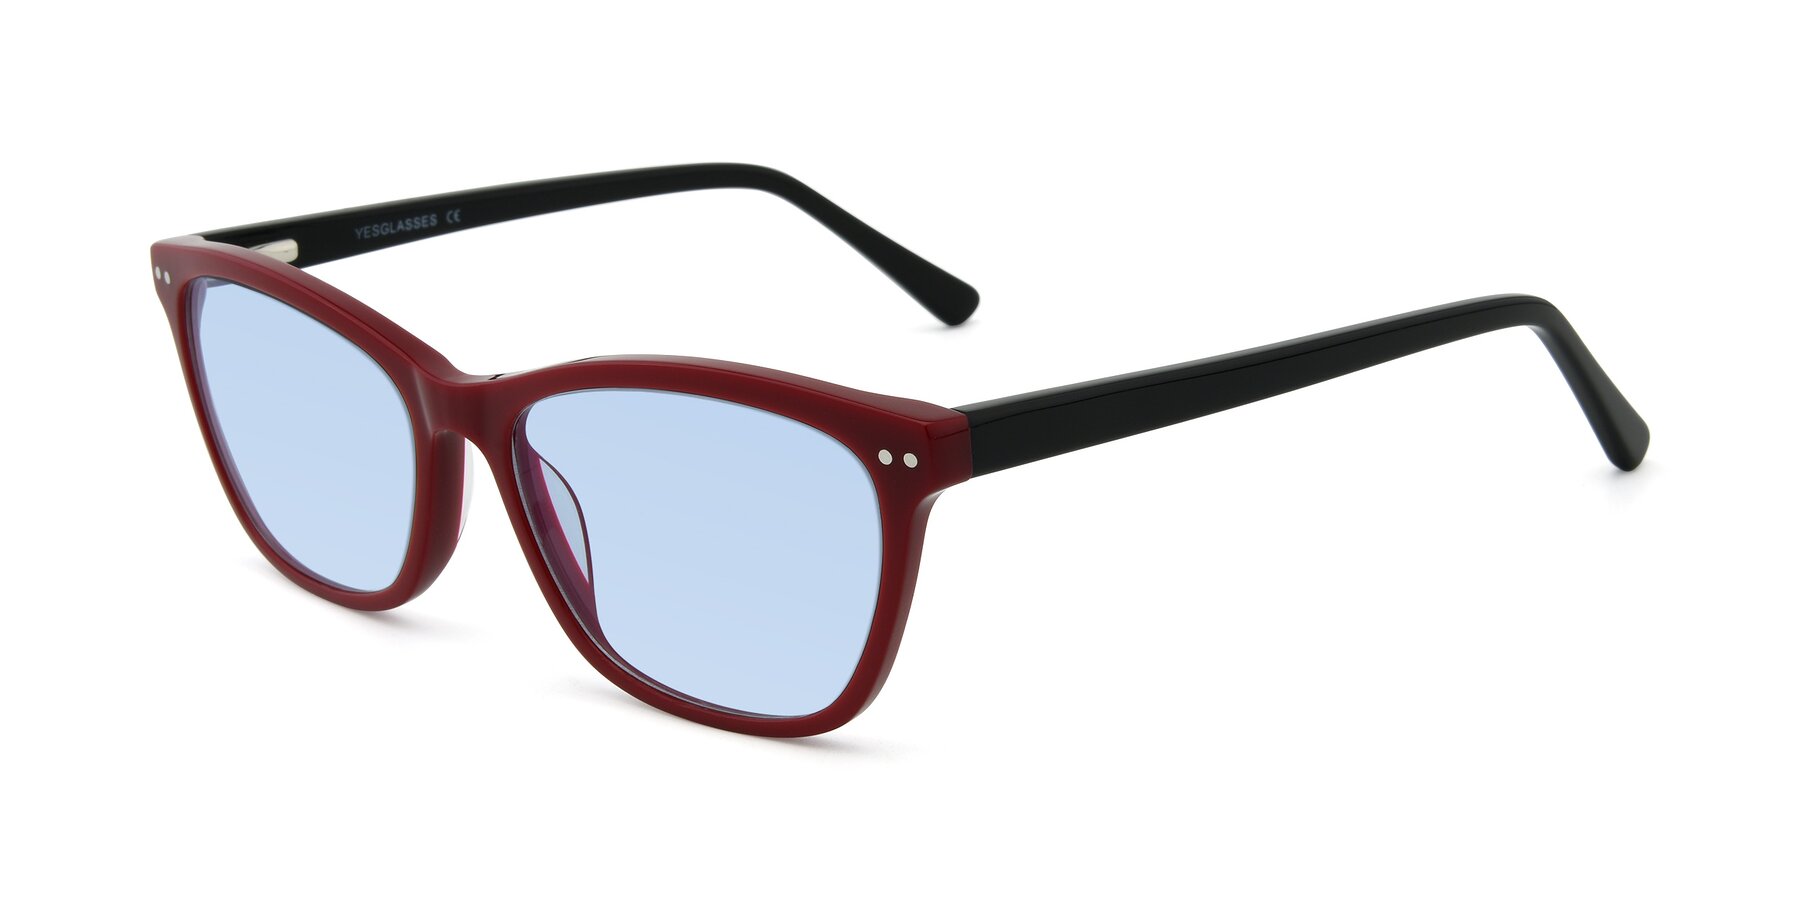 Angle of 17350 in Wine with Light Blue Tinted Lenses